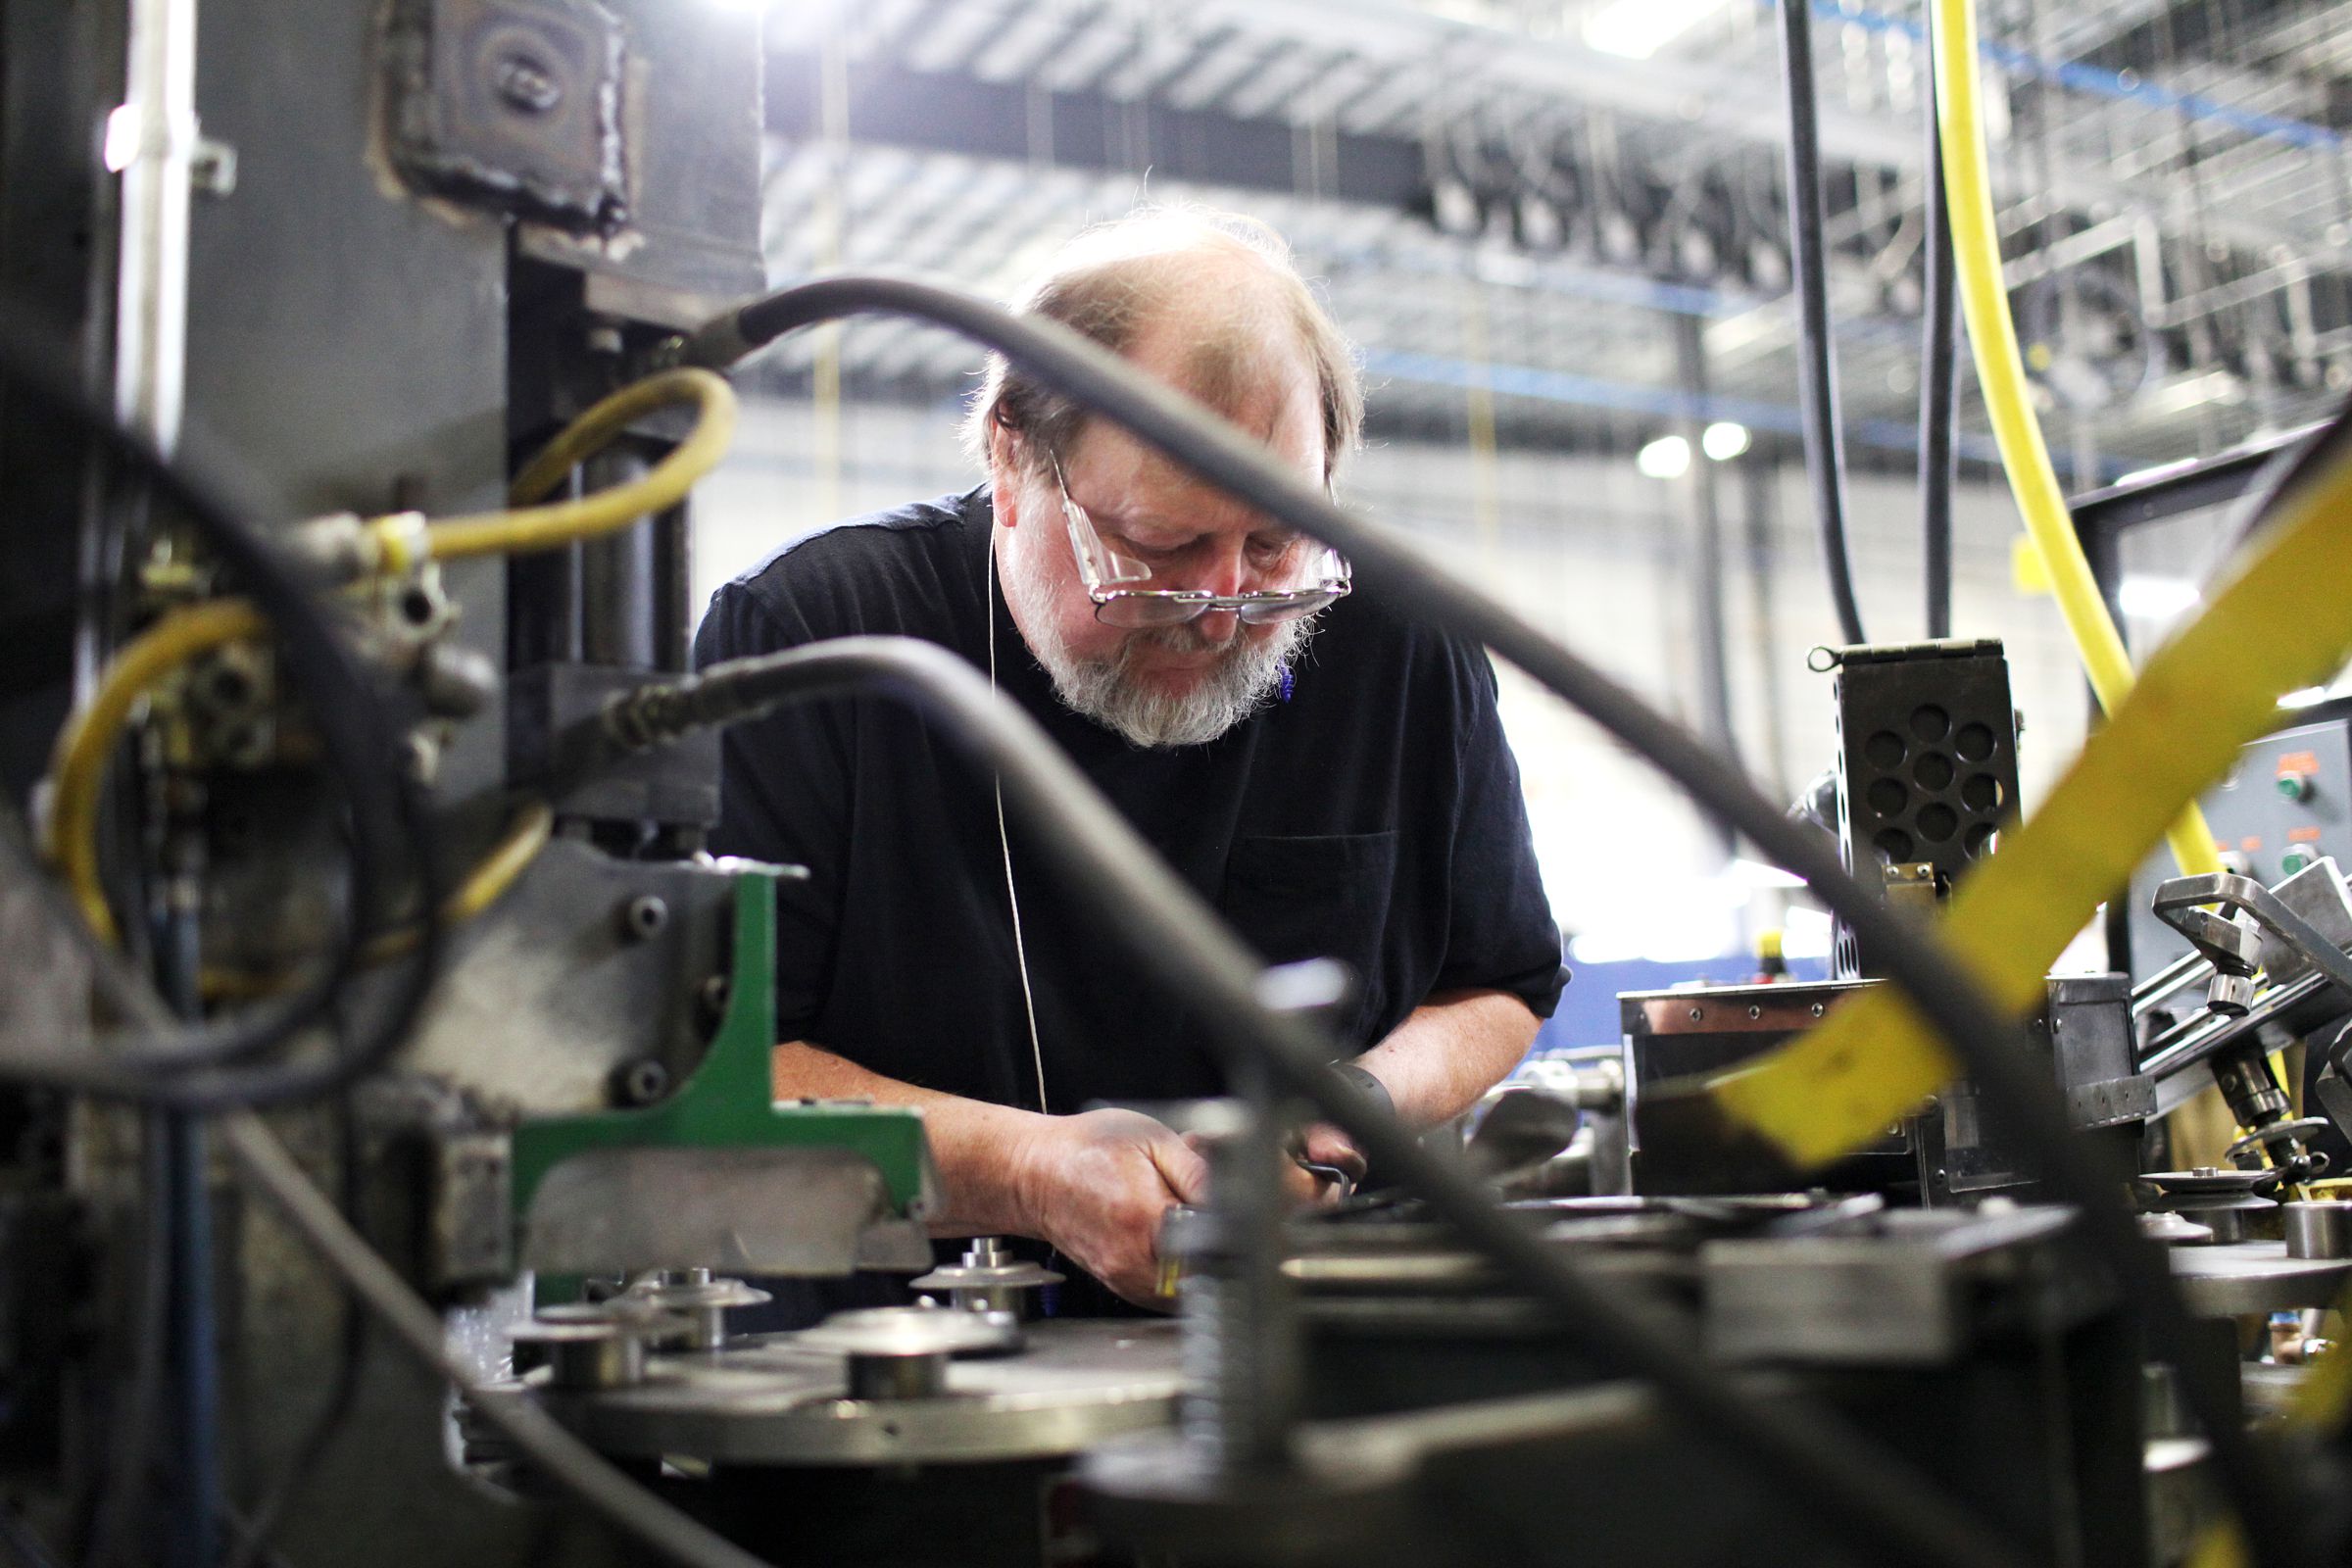 Machinist Joel Tremblay, of Lebanon, N.H., processes pulley parts at New Hampshire Industries, also known as NHI, on Tuesday, June 6, 2017, in Claremont, N.H. NHI, a pulley manufacturer, recently consolidated its operations from Lebanon and Wisconsin to a 137,000-square-foot building in Claremont. (Valley News - Jovelle Tamayo) Copyright Valley News. May not be reprinted or used online without permission. Send requests to permission@vnews.com.